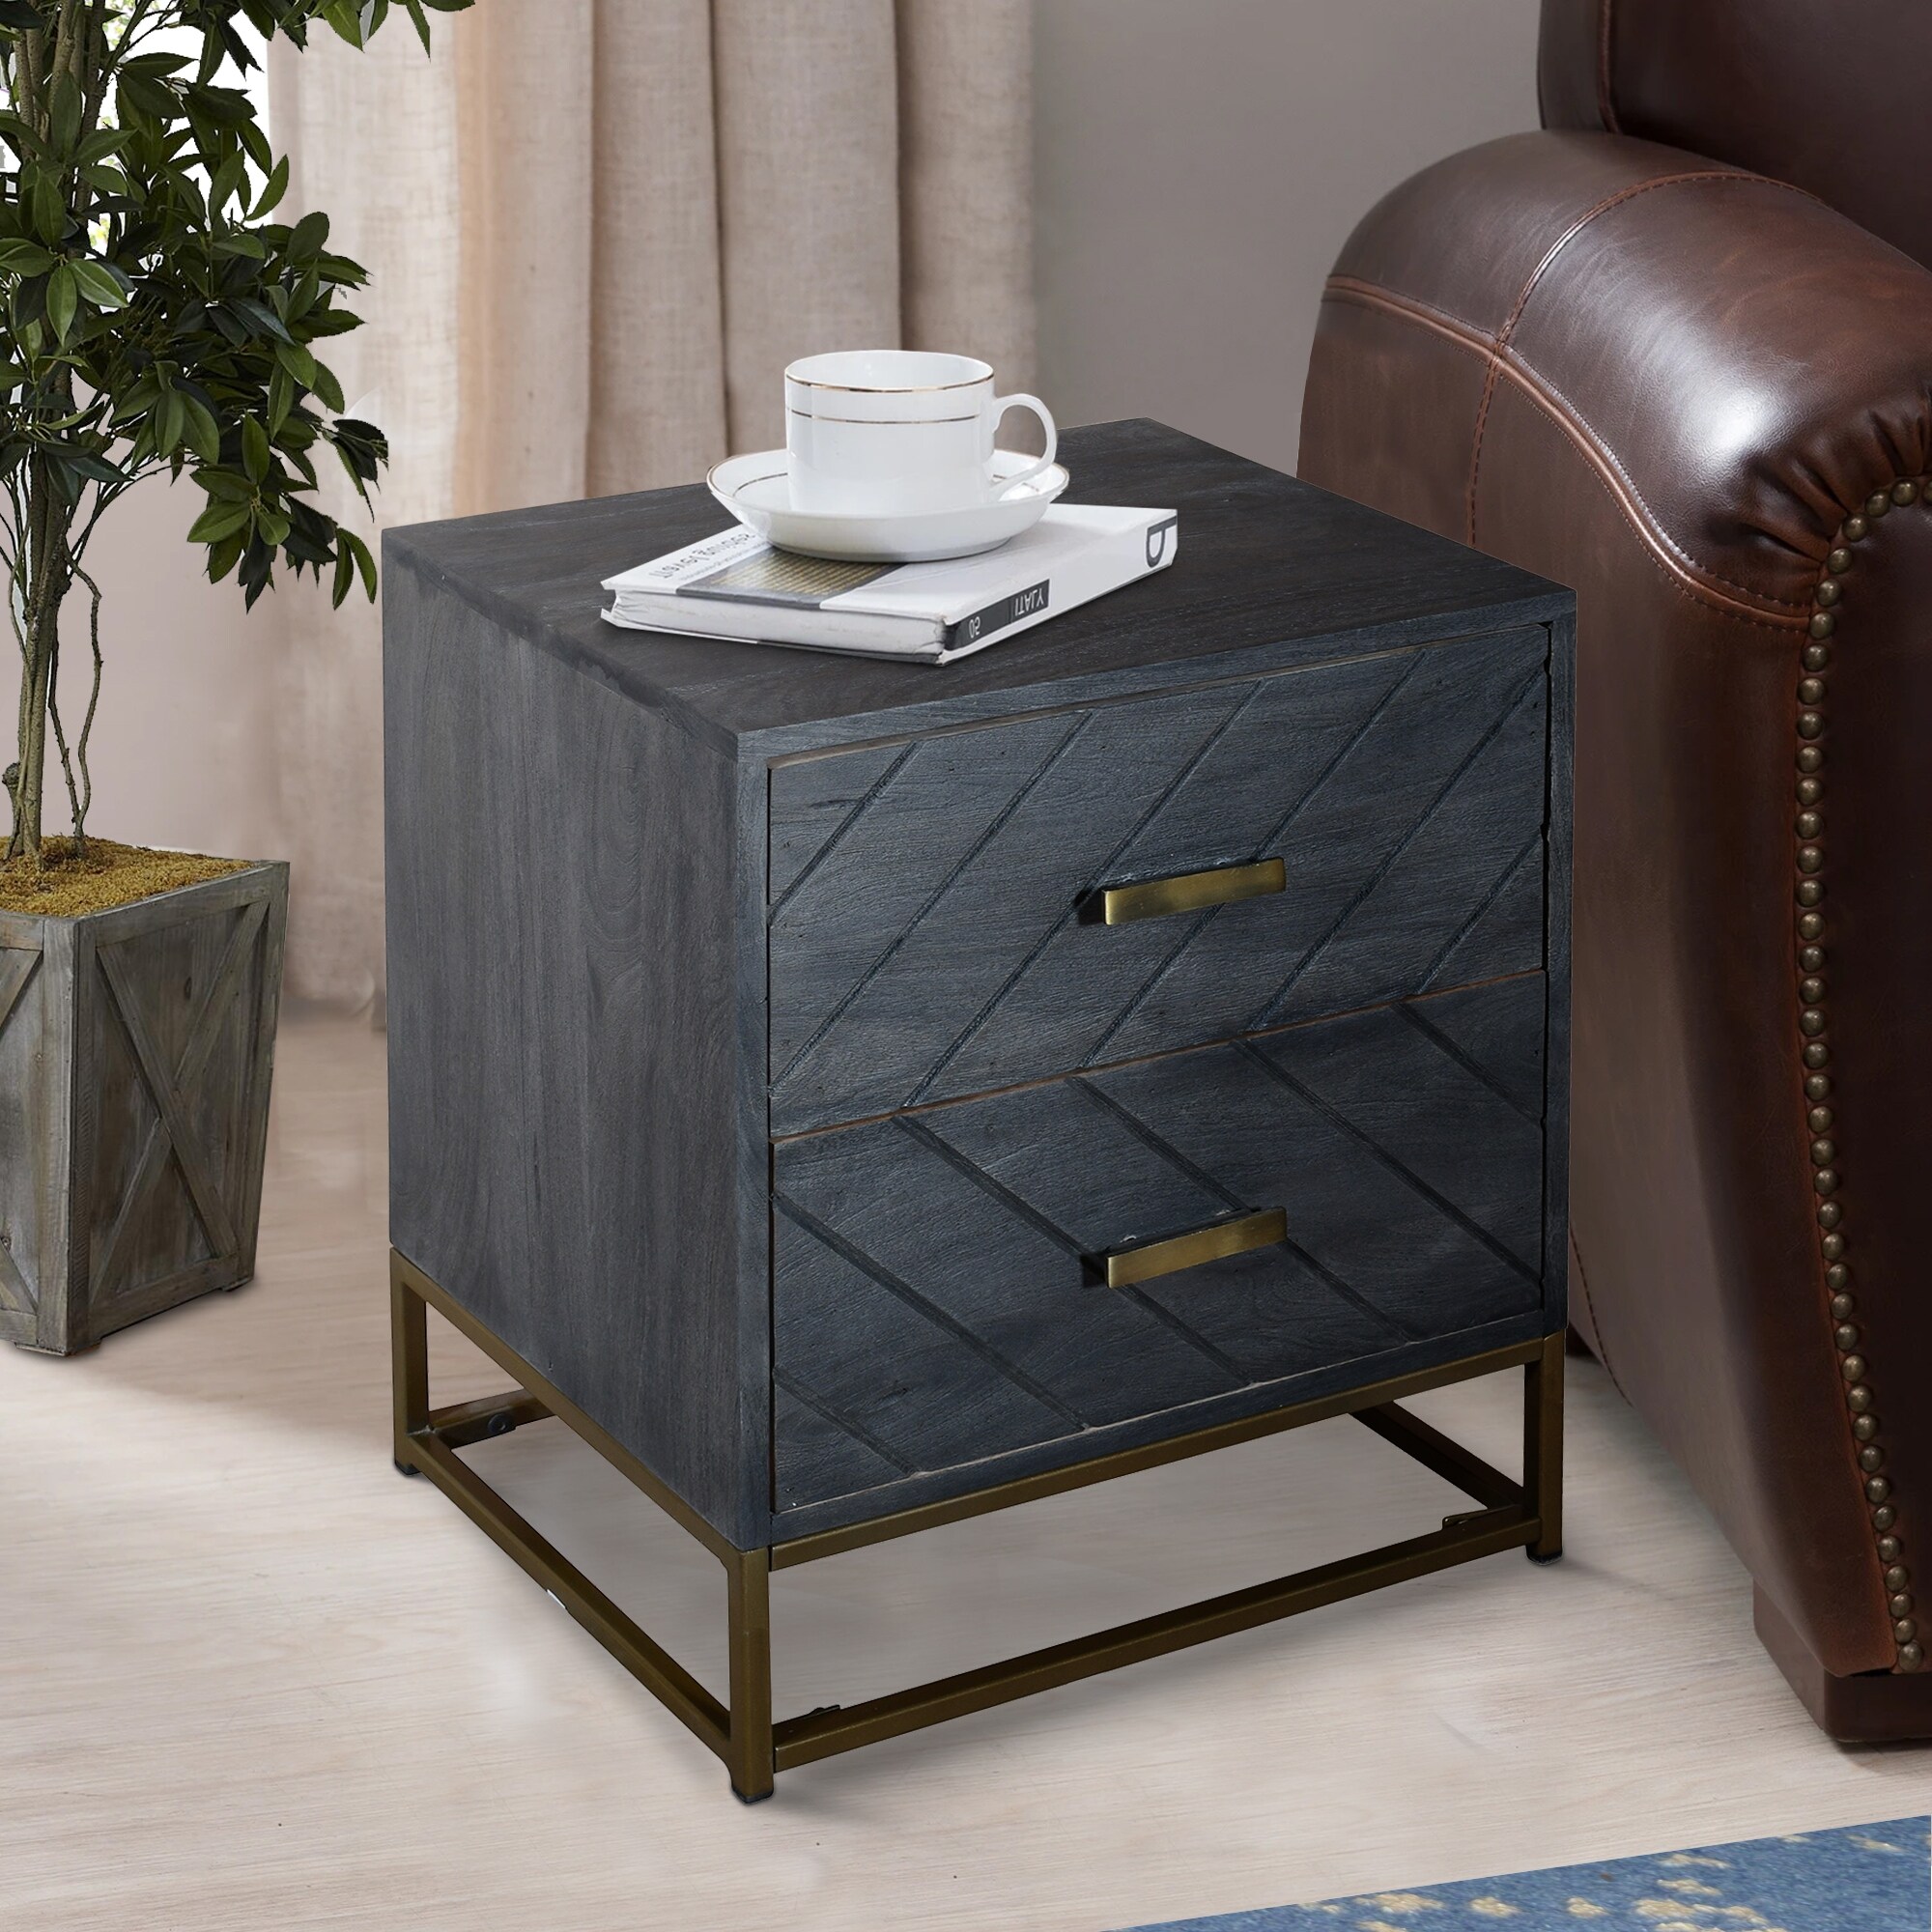 21.7 Inches 2 Drawer Mango Wood Bedside Table with Tubular Metal Base, Gray